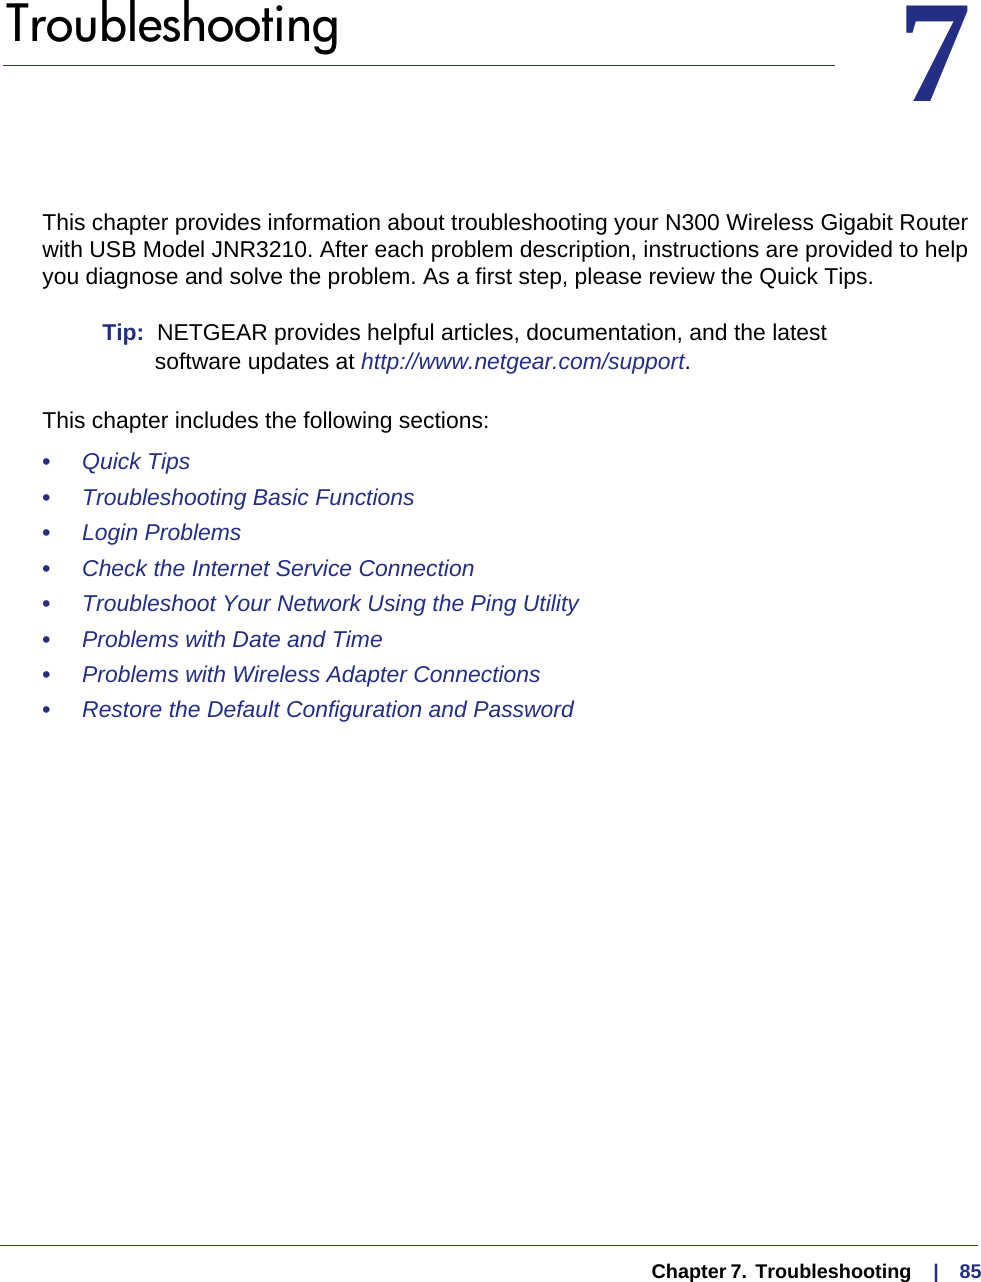   Chapter 7.  Troubleshooting     |    8577.   TroubleshootingThis chapter provides information about troubleshooting your N300 Wireless Gigabit Router with USB Model JNR3210. After each problem description, instructions are provided to help you diagnose and solve the problem. As a first step, please review the Quick Tips.Tip:  NETGEAR provides helpful articles, documentation, and the latest software updates at http://www.netgear.com/support.This chapter includes the following sections:•     Quick Tips •     Troubleshooting Basic Functions •     Login Problems •     Check the Internet Service Connection •     Troubleshoot Your Network Using the Ping Utility •     Problems with Date and Time •     Problems with Wireless Adapter Connections •     Restore the Default Configuration and Password 